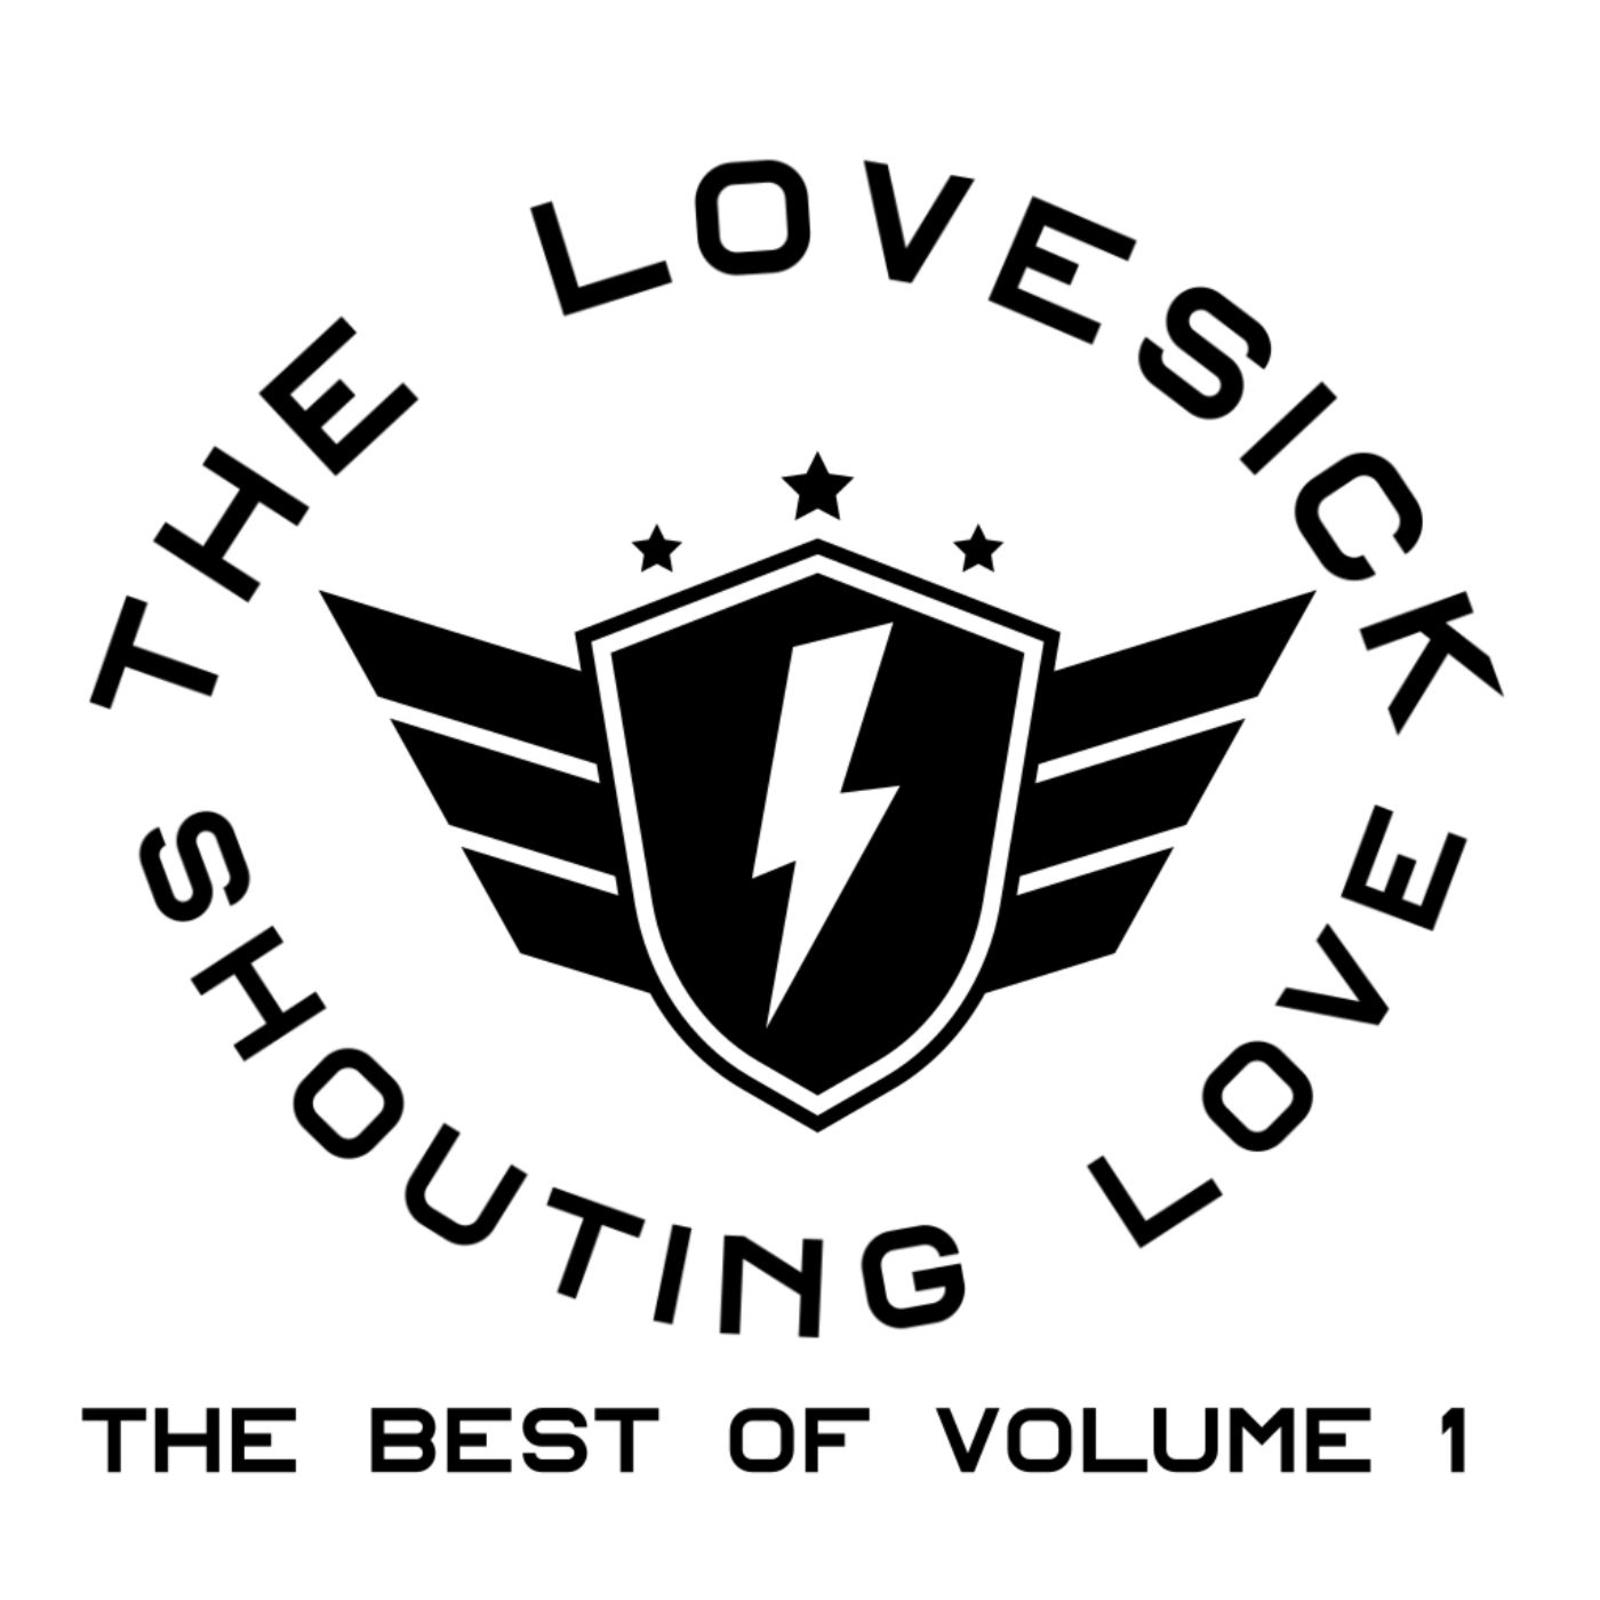 The Lovesick - Shouting Love - The Best of Volume 1